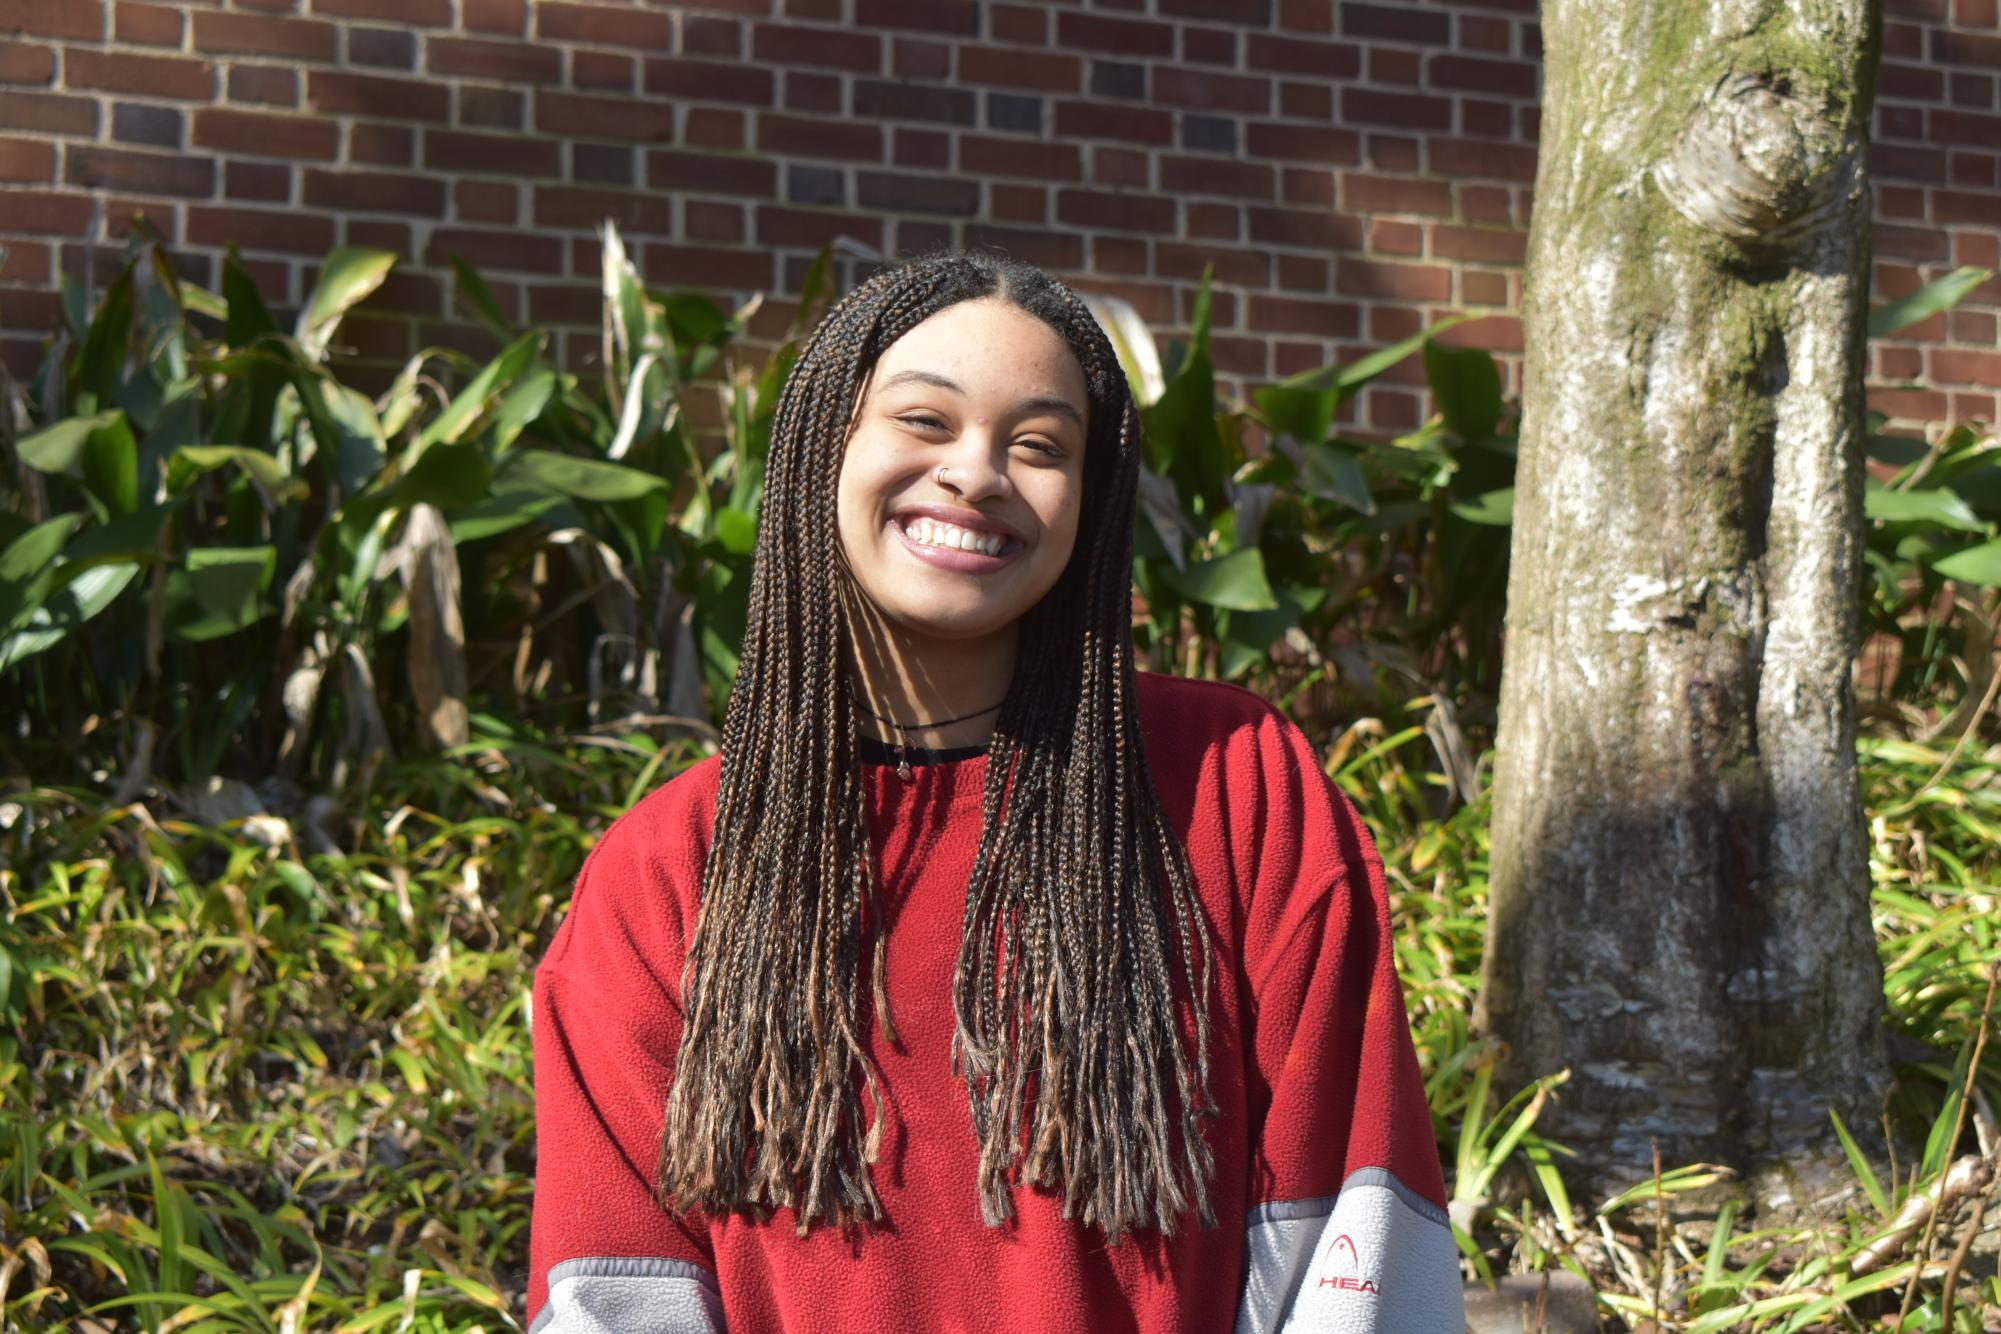 Senior Imani Johnson will be attending Bard College in the fall and will study poetry.